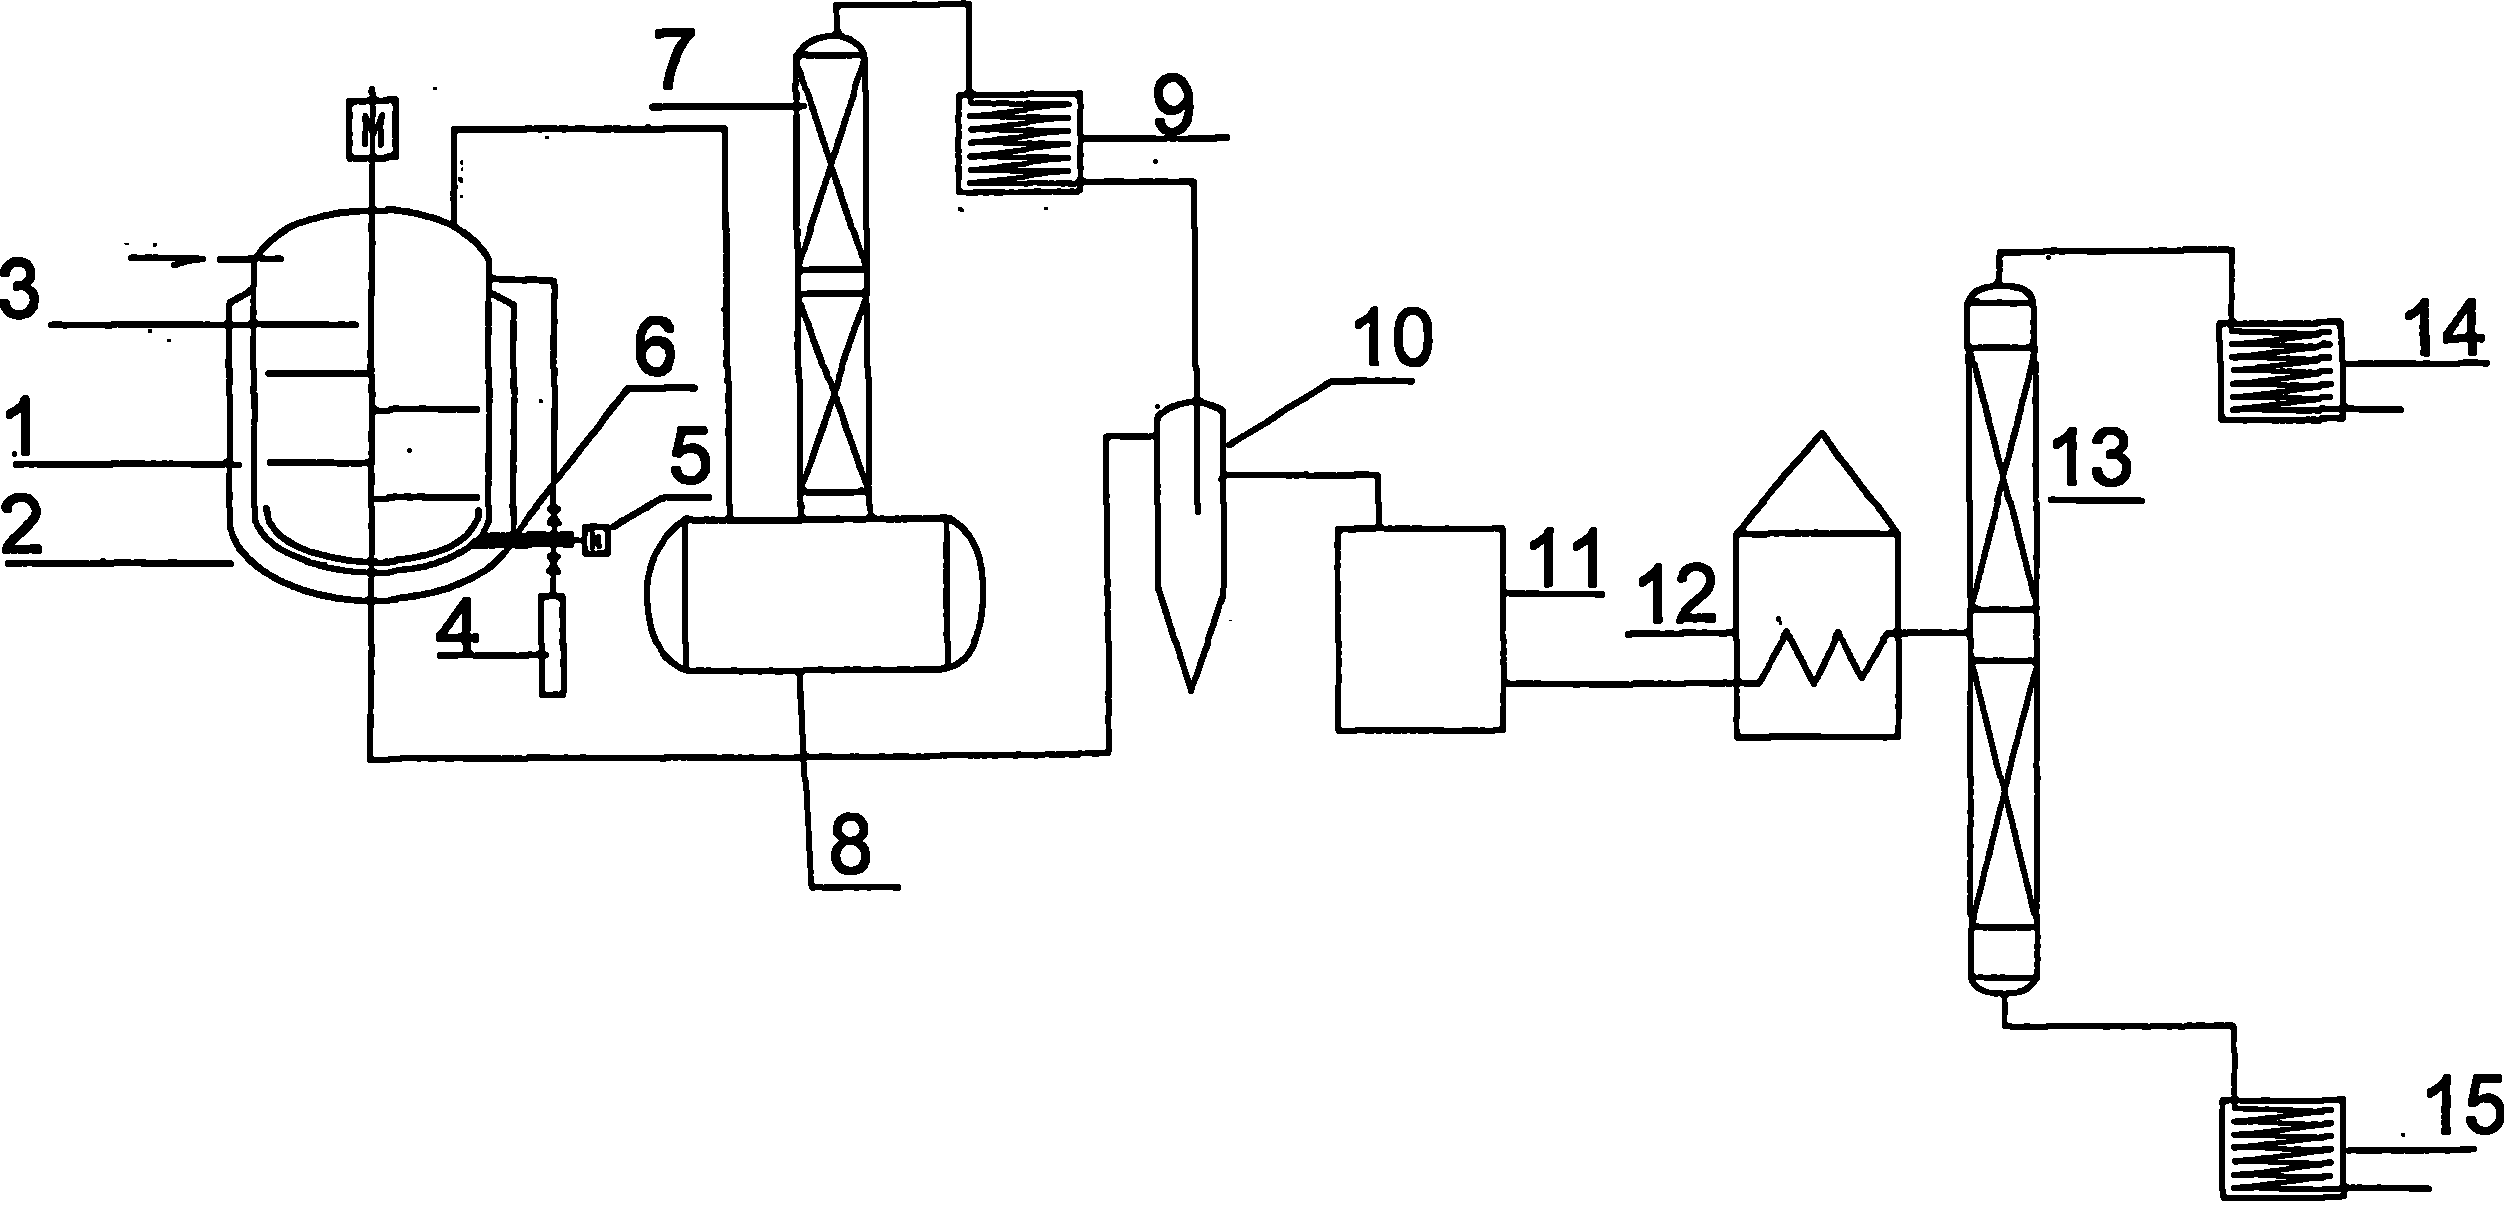 Industrialized method for producing fuel oil by using waste plastics